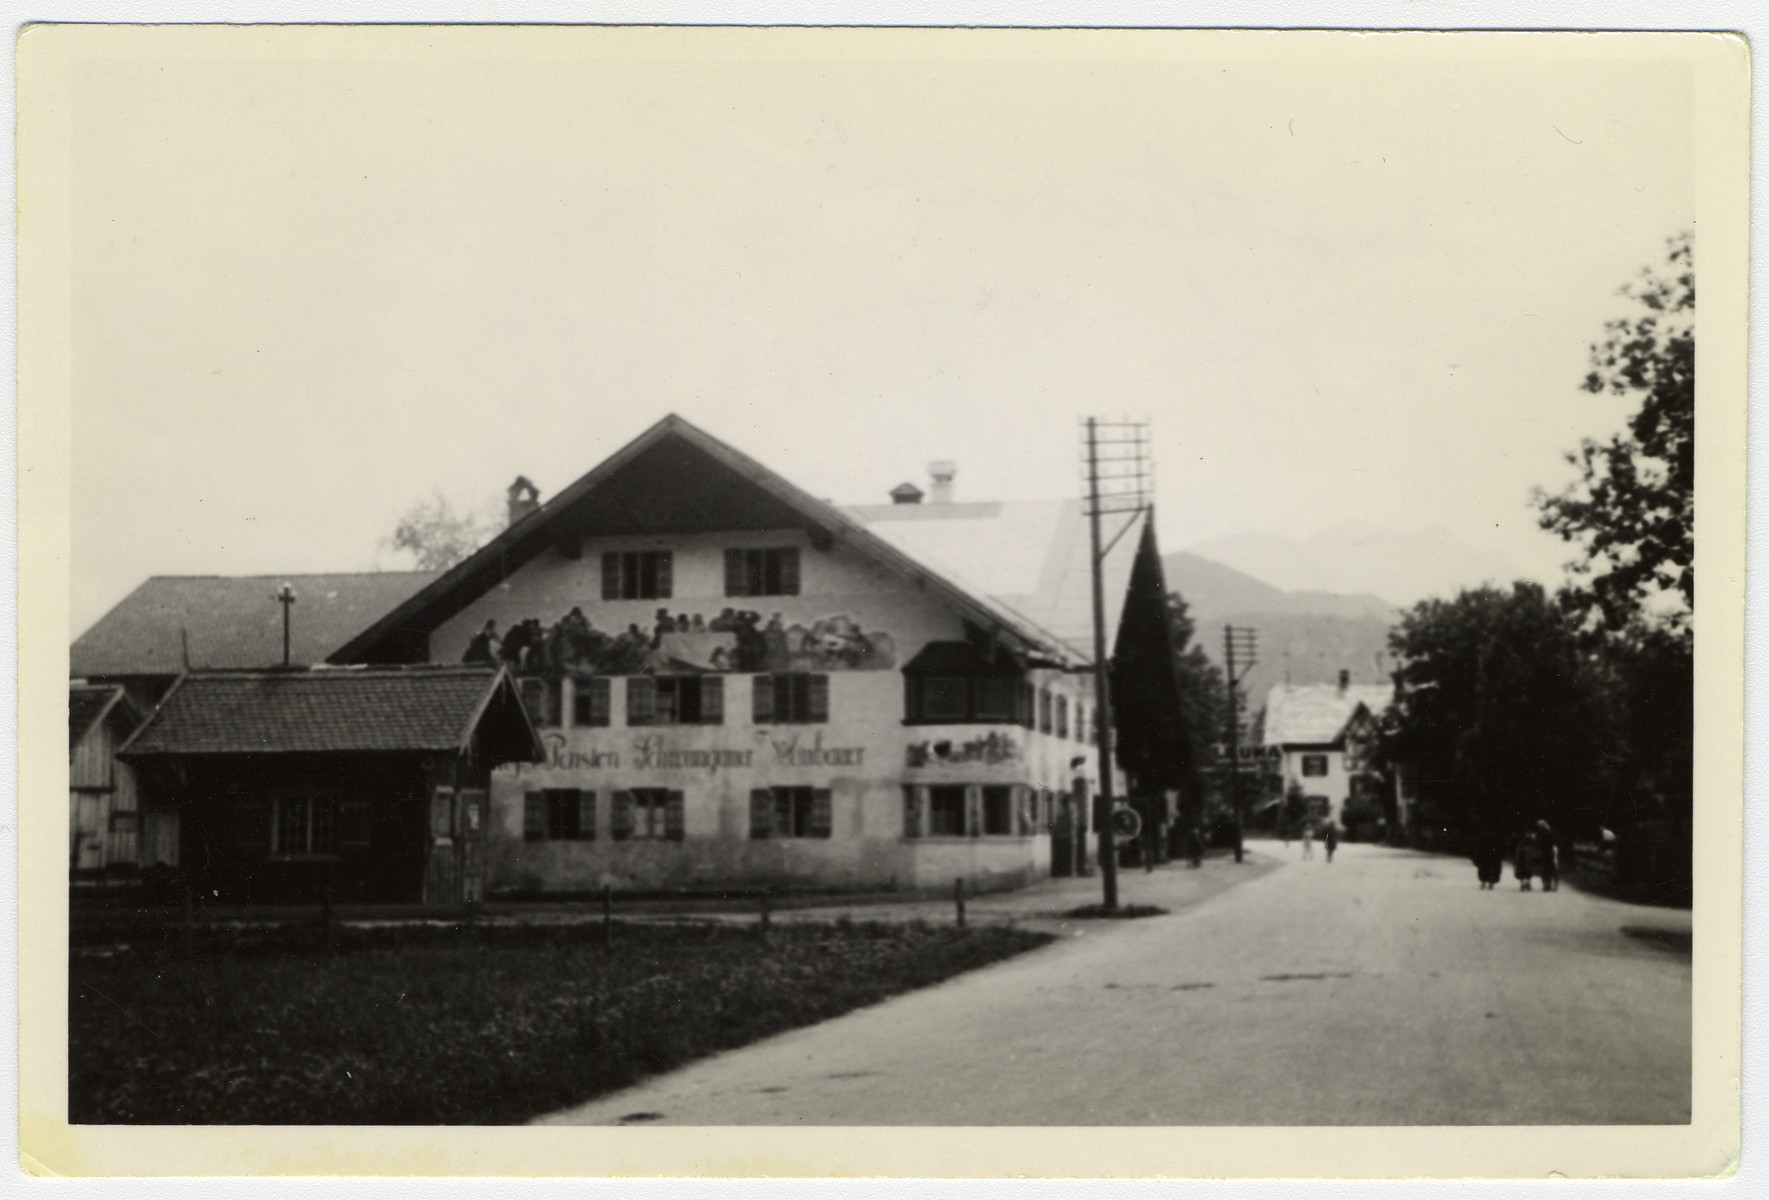 View of a rest home in Schongau Germany frequented by American soldiers.